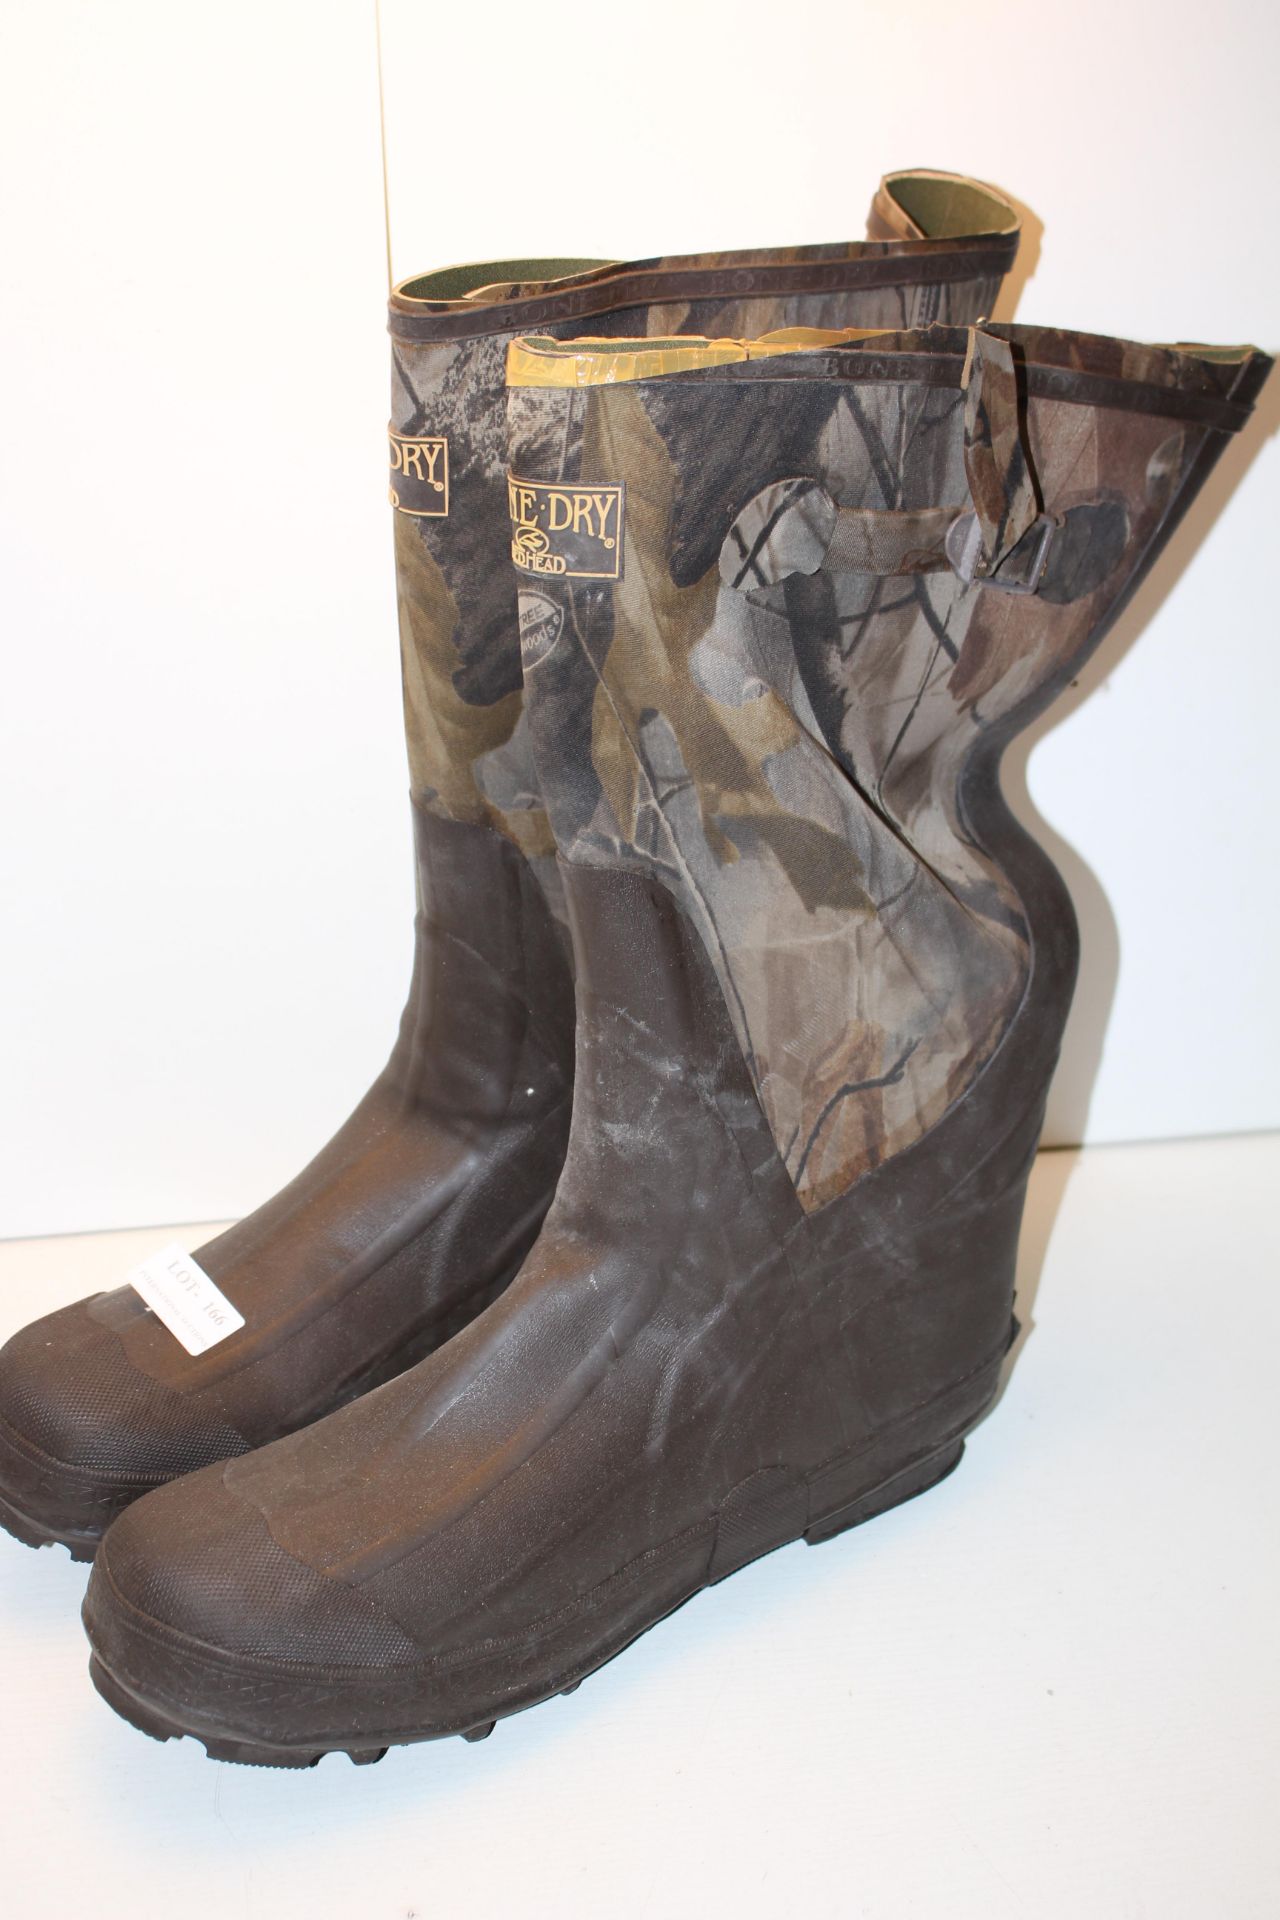 UNBOXED CAMO WELLINGTON BOOTS UK SIZE 13Condition ReportAppraisal Available on Request- All Items